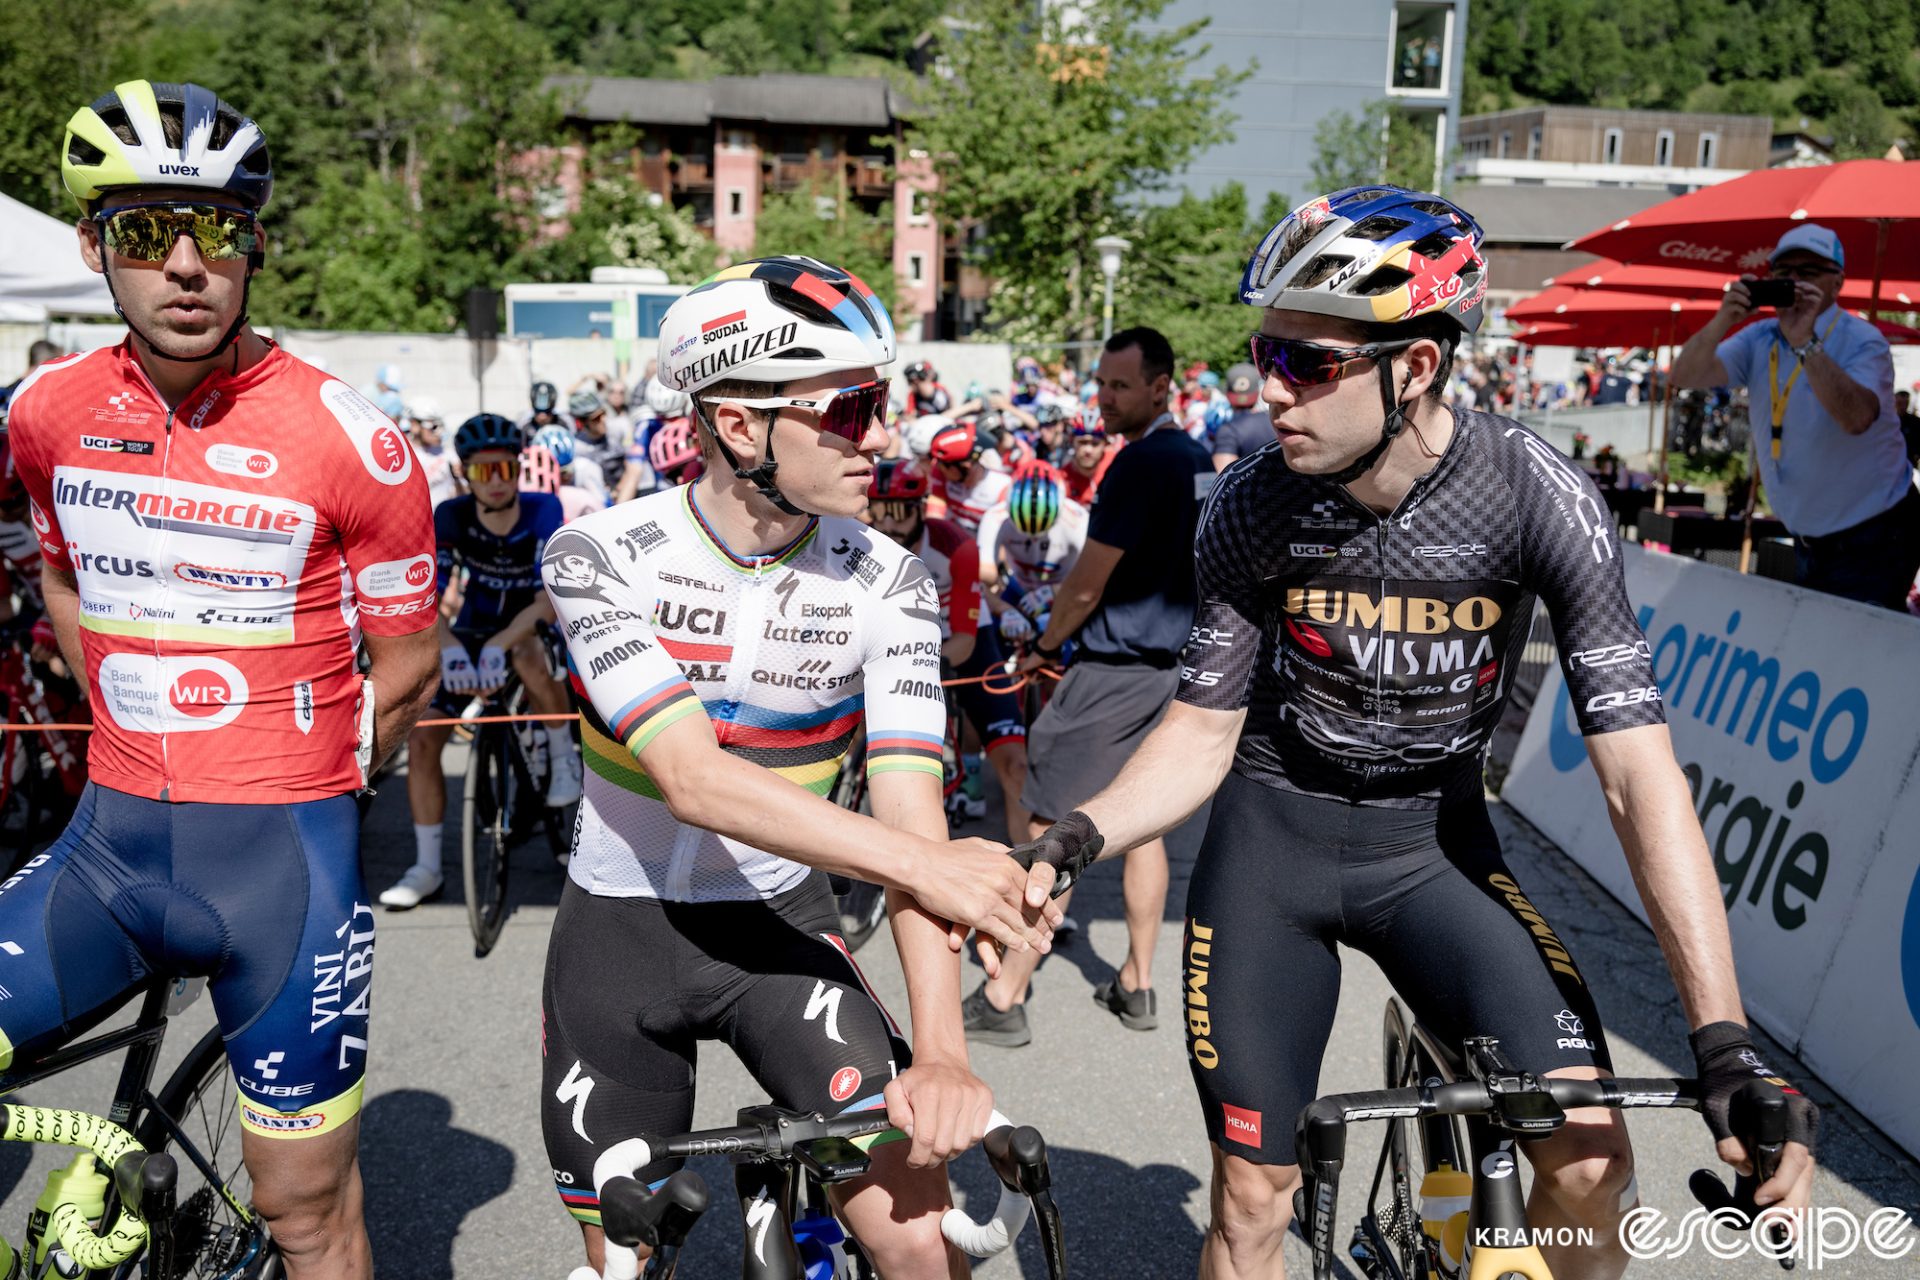 Remco Evenepoel and Wout van Aert shake hands at the start of a Tour de Suisse stage.